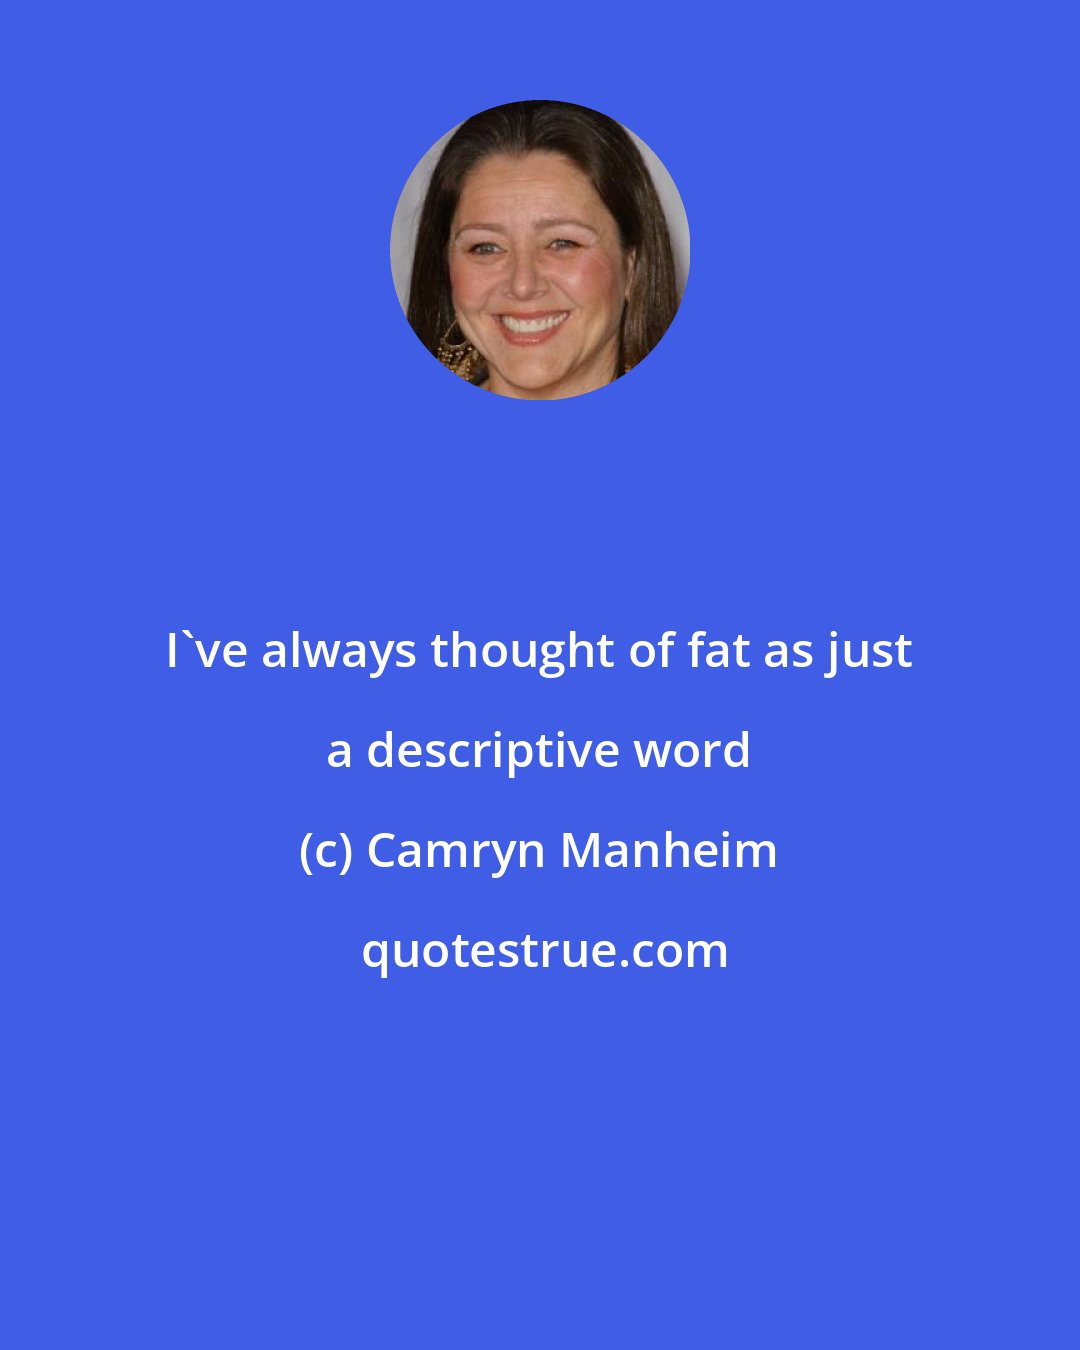 Camryn Manheim: I've always thought of fat as just a descriptive word